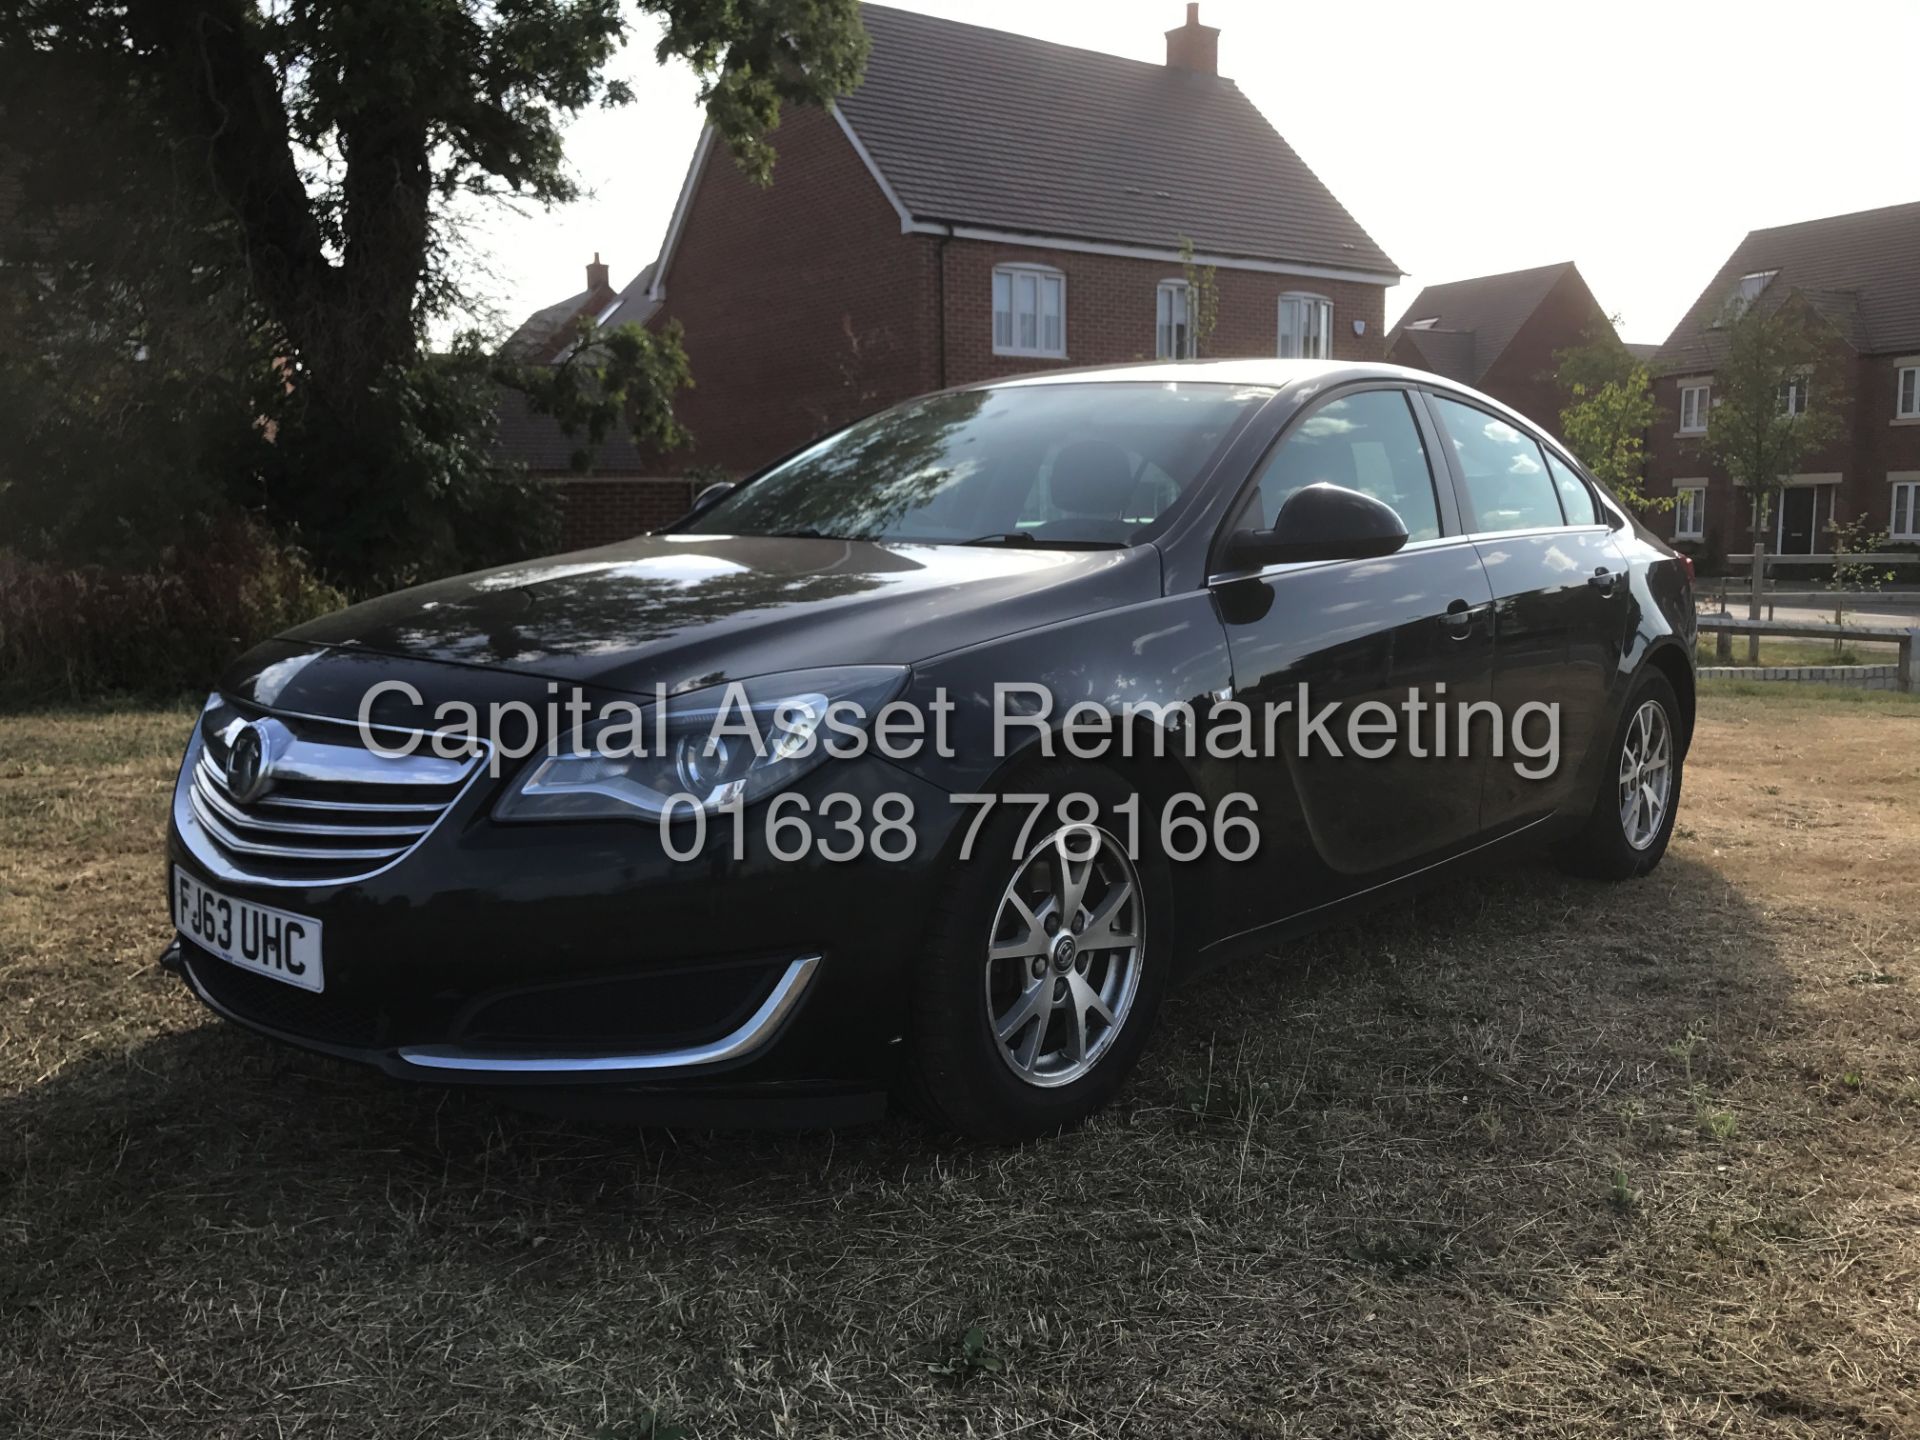 On Sale VAUXHALL INSIGNIA 2.0CDTI "DESIGN" 6 SPEED (2014 MODEL-NEW SHAPE) AIR CON -ELEC PACK -CRUISE